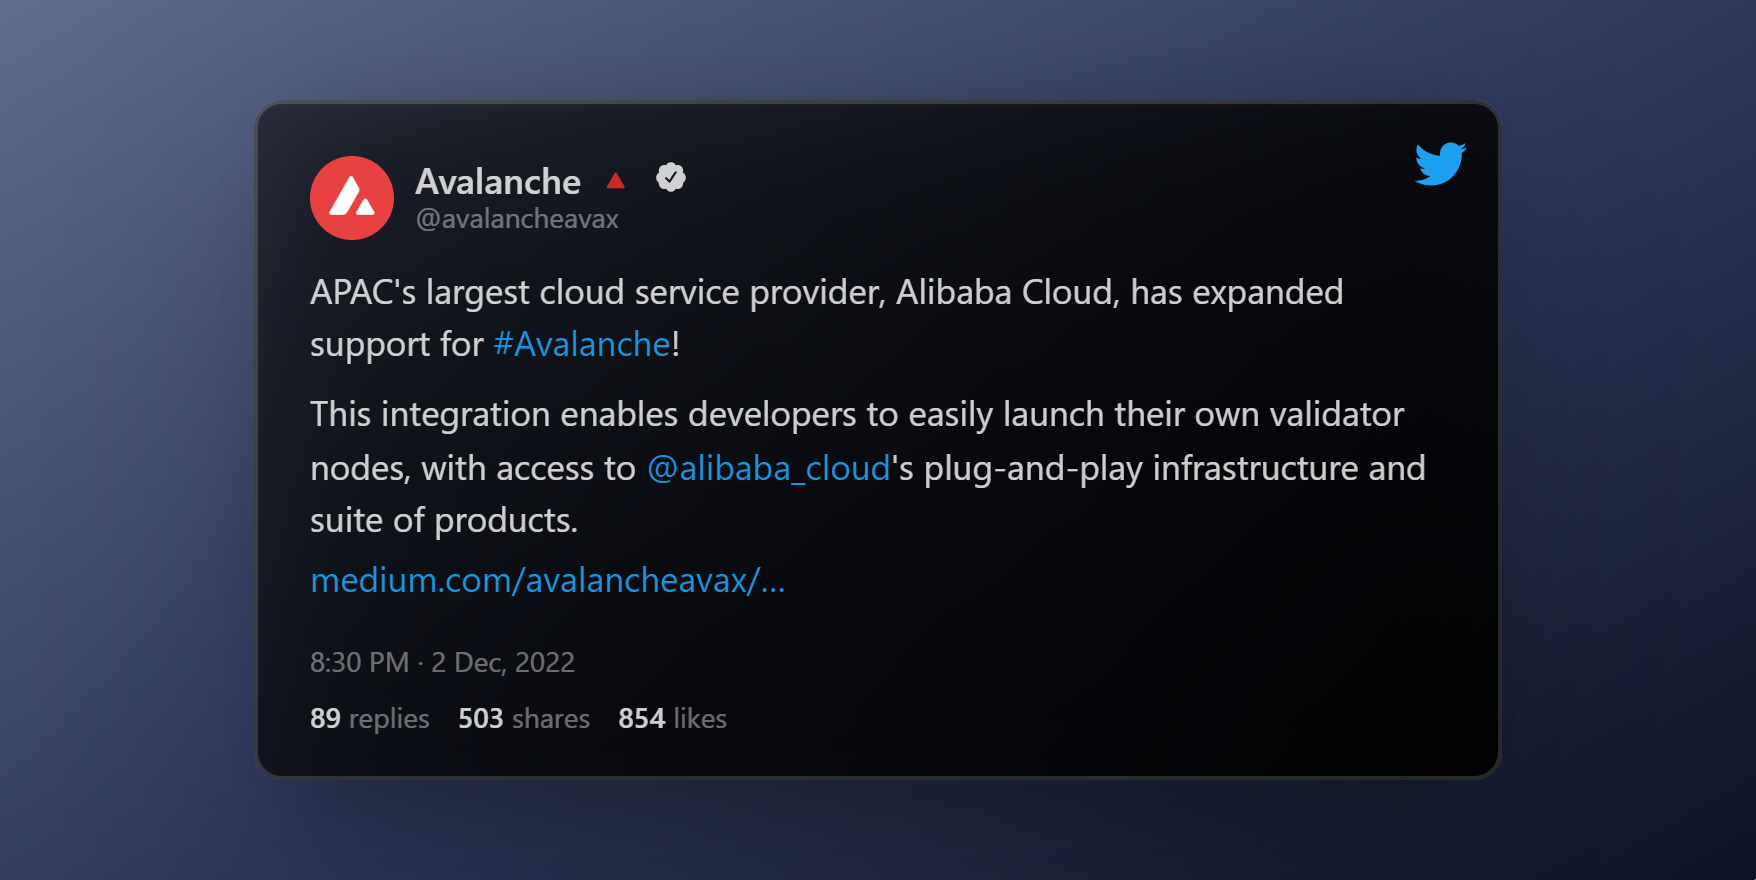 Avalanche’s Collaboration with Alibaba Cloud’s Infrastructure Services 